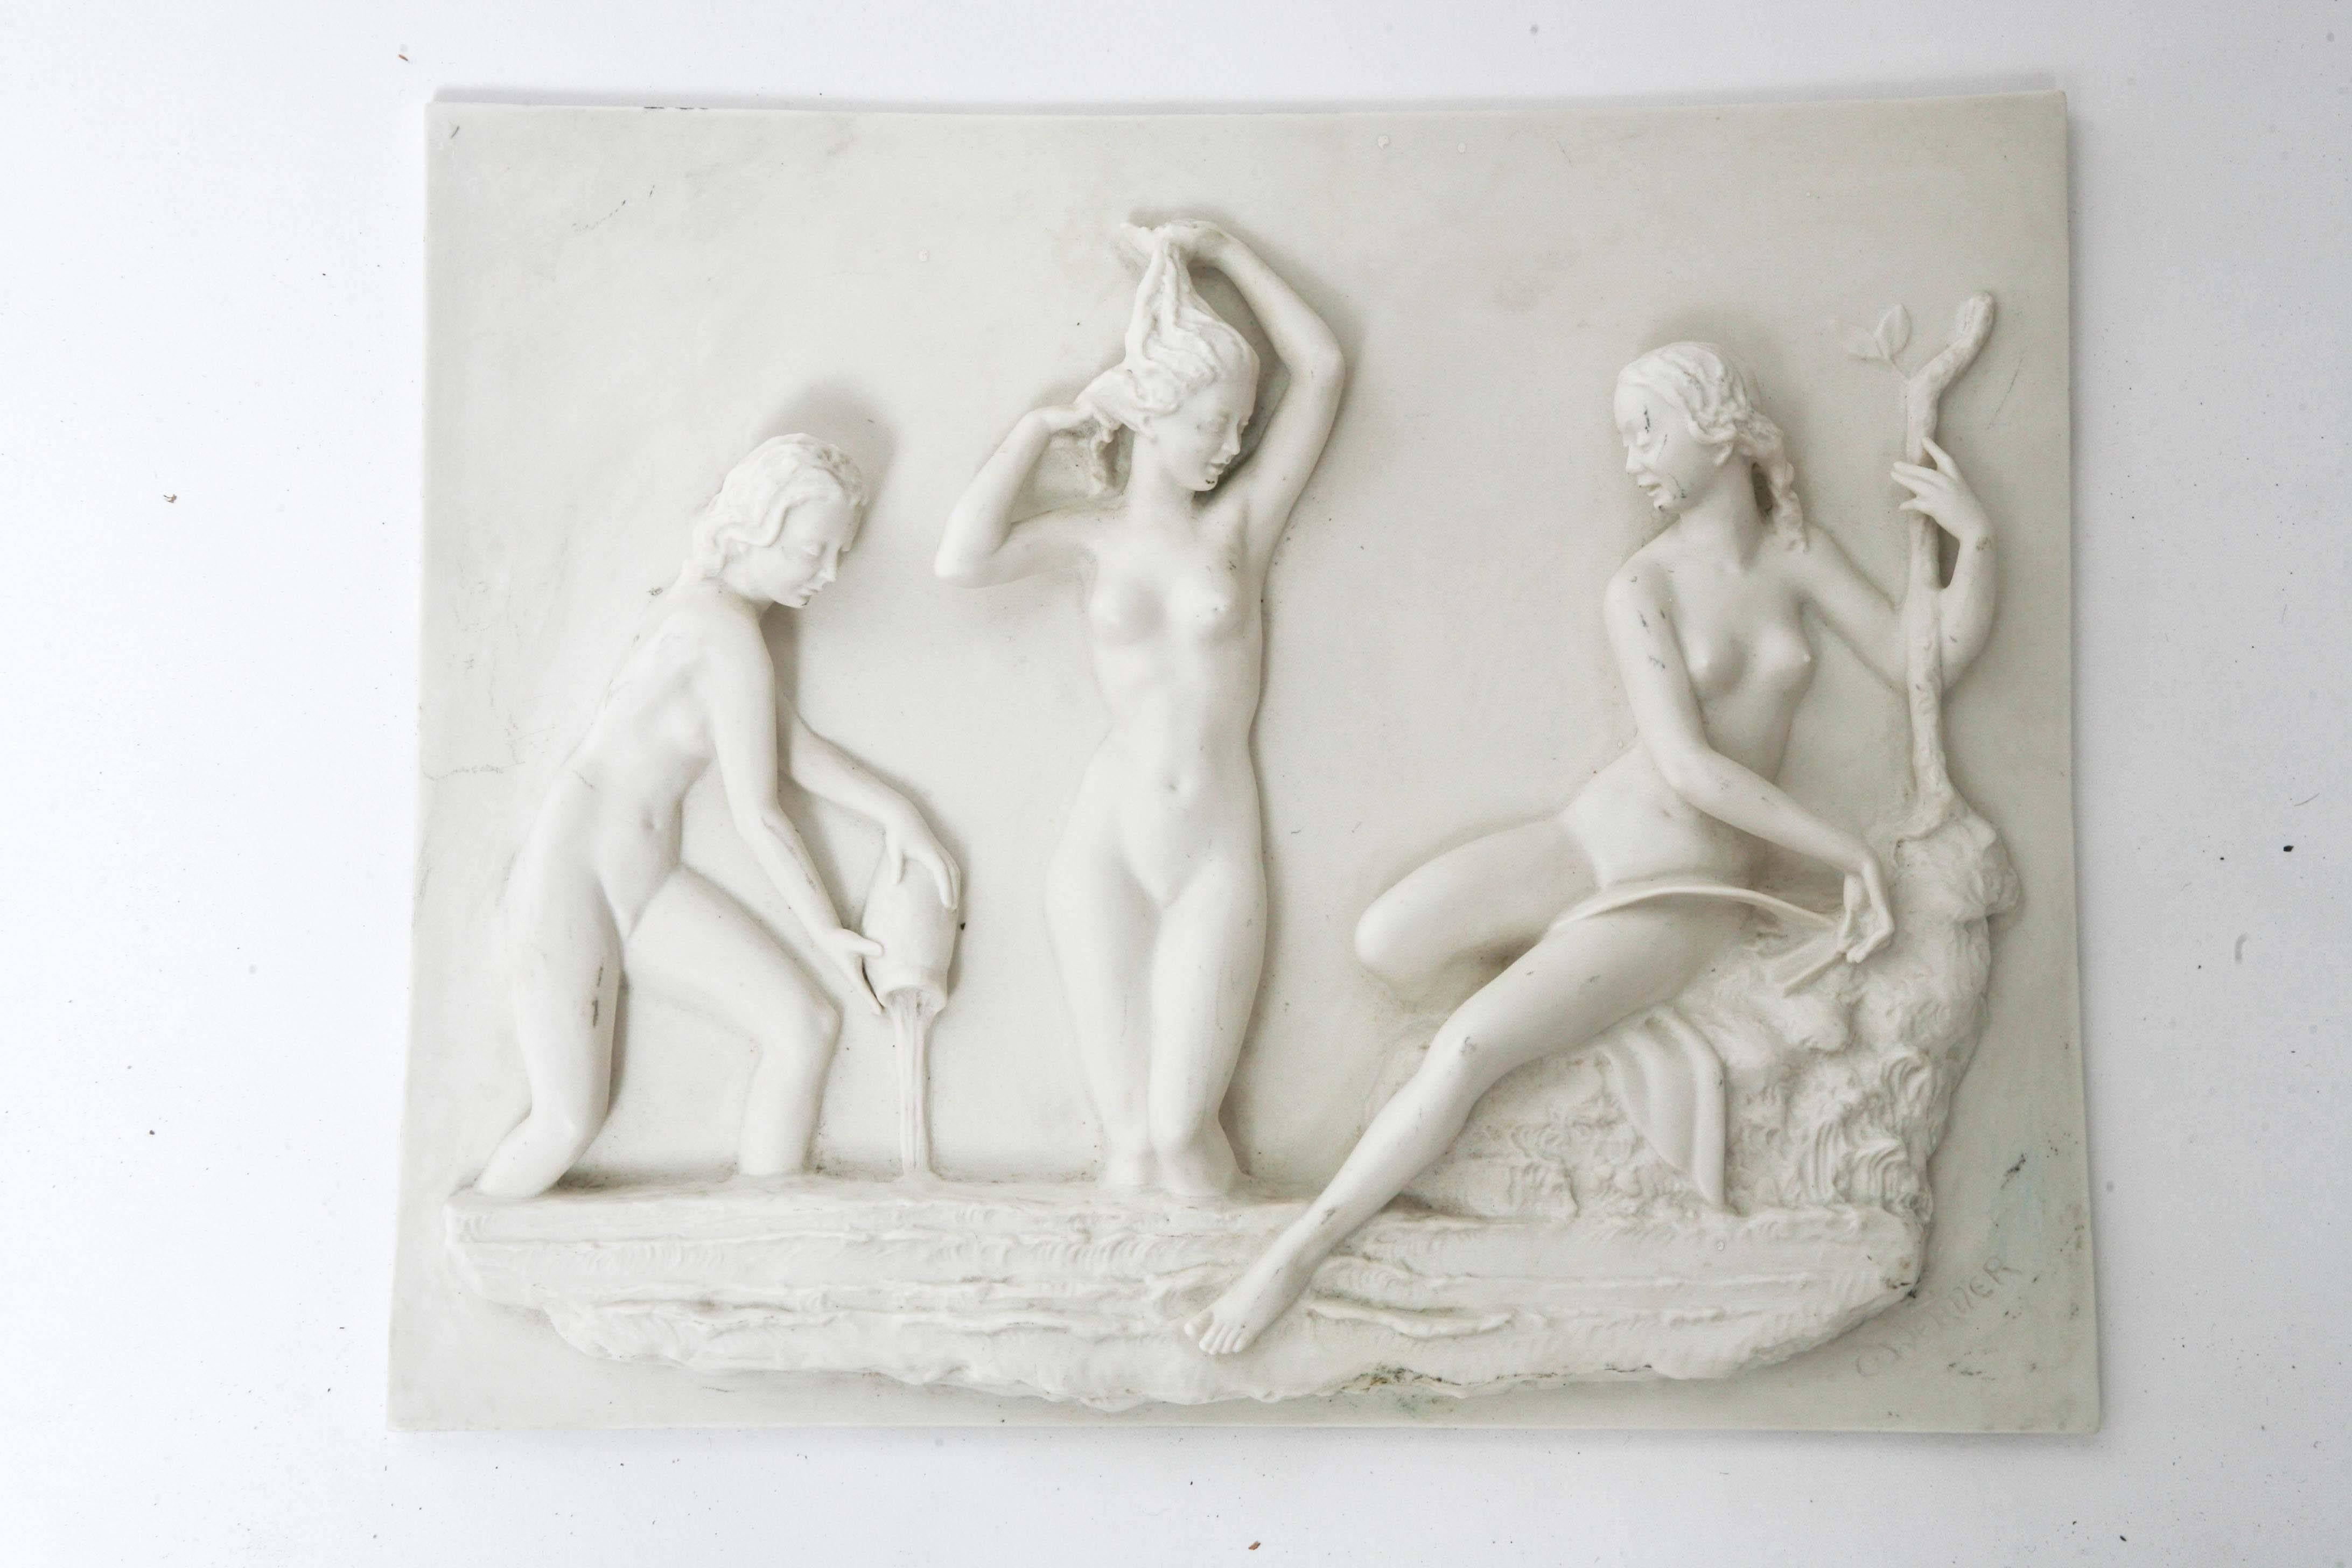 Made of bisque in high relief, this plaque features three female nudes frolicking by water side. Sculpture is a little dirty but its in very good condition. It is signed on lower right. Carl Werner is a well listed German artist / sculptor.